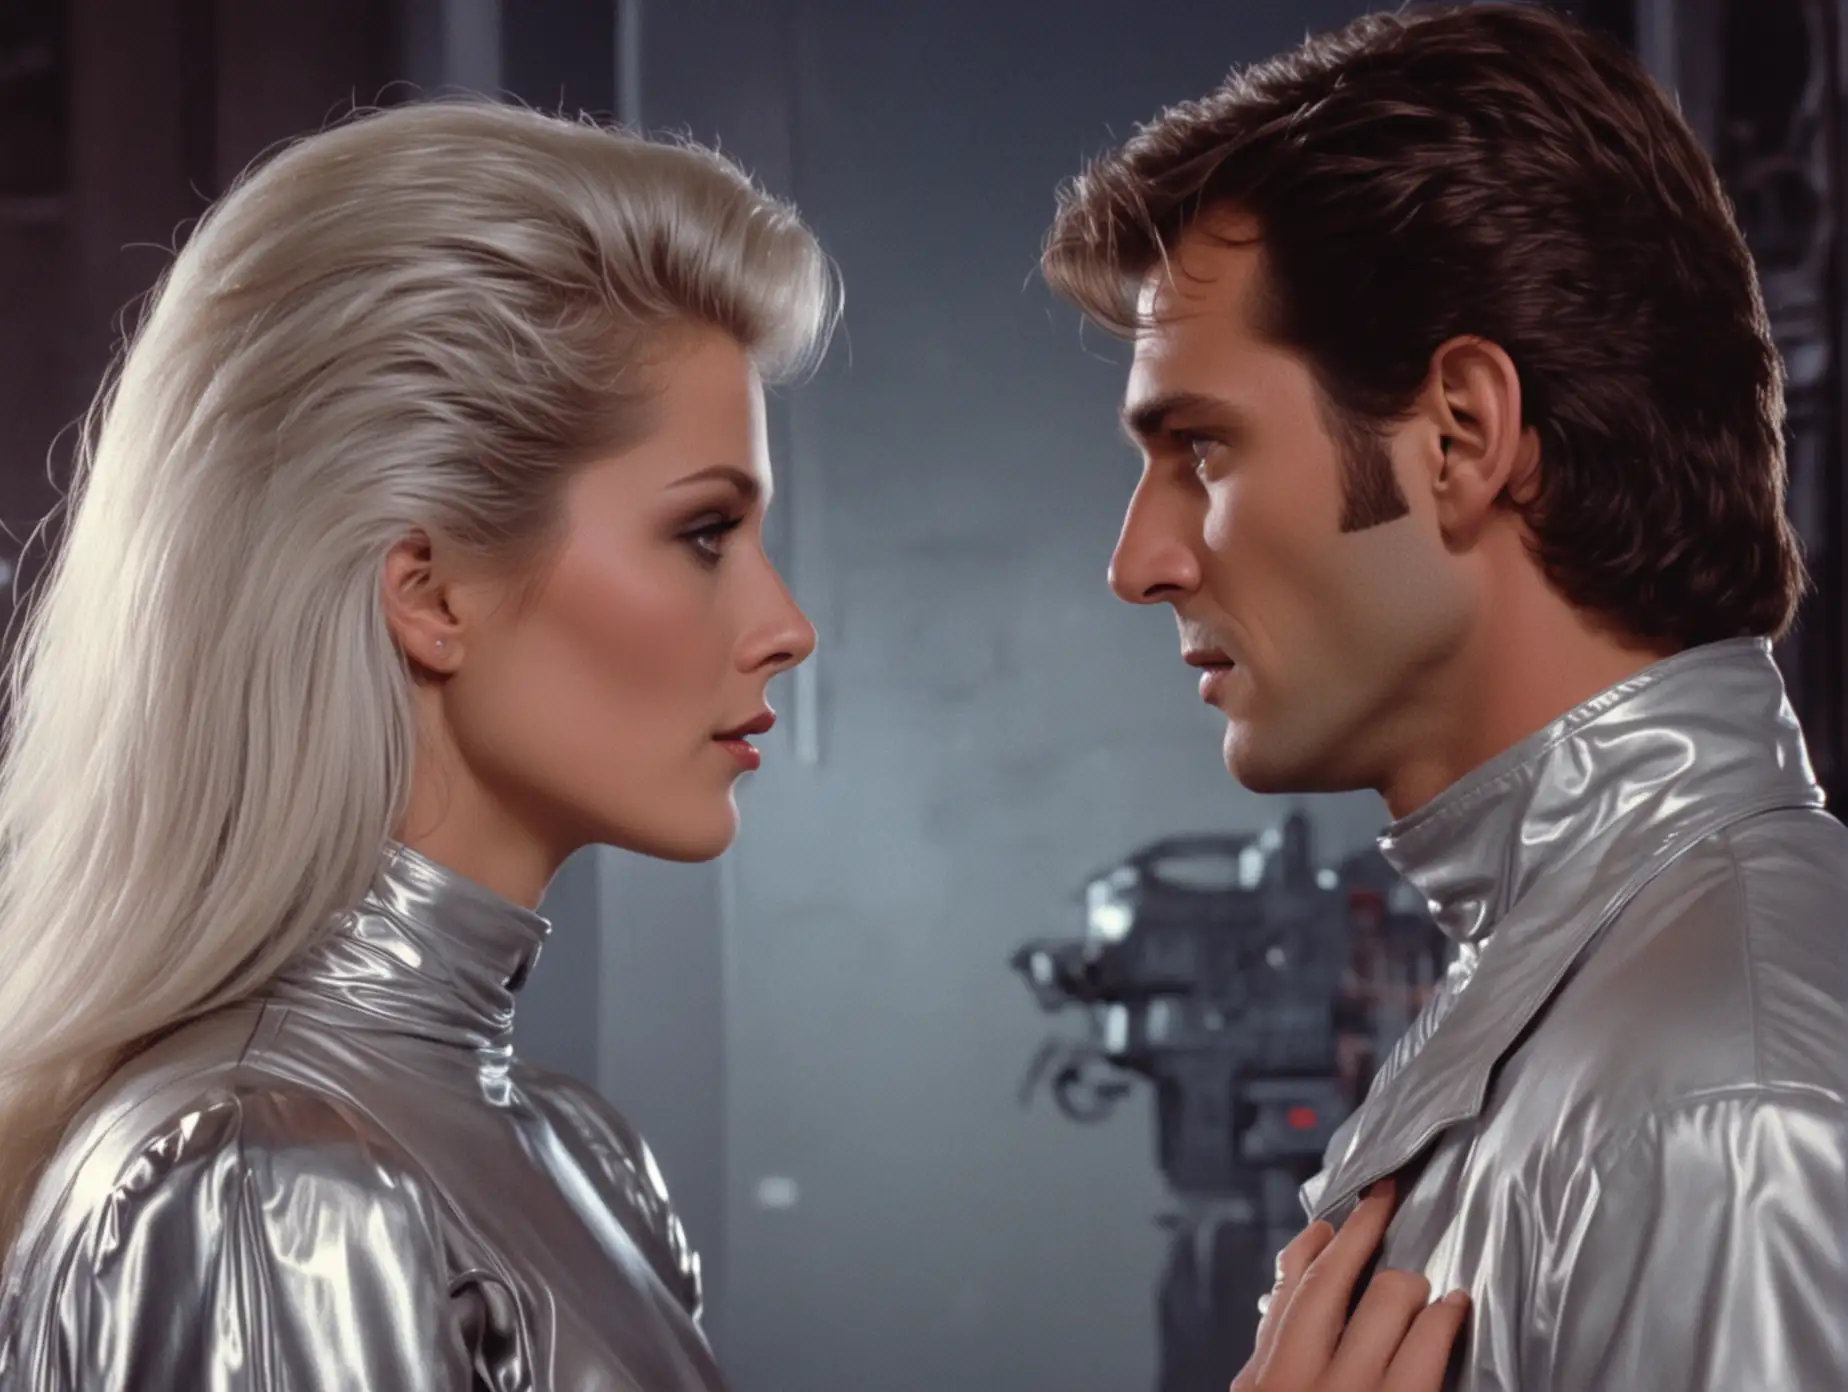 Romantic Date Scene with Silver Lady in 1980s SciFi Setting